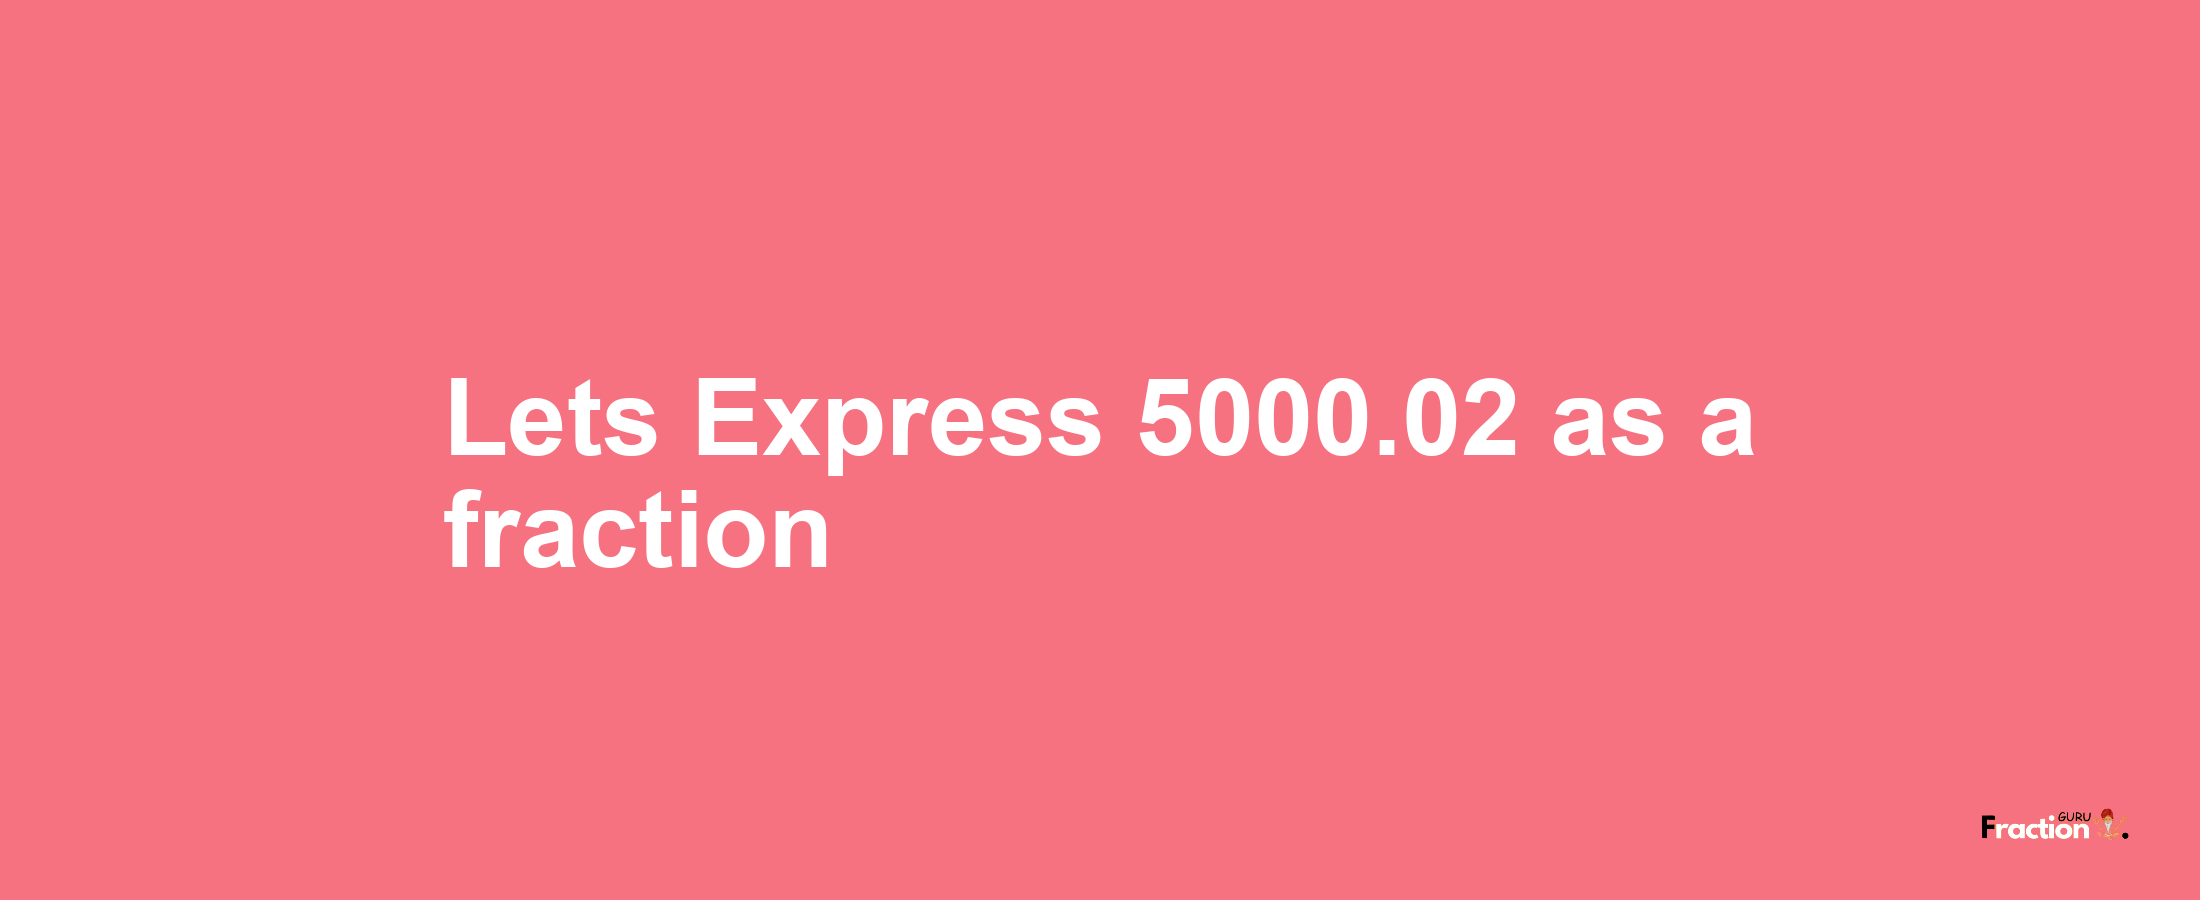 Lets Express 5000.02 as afraction